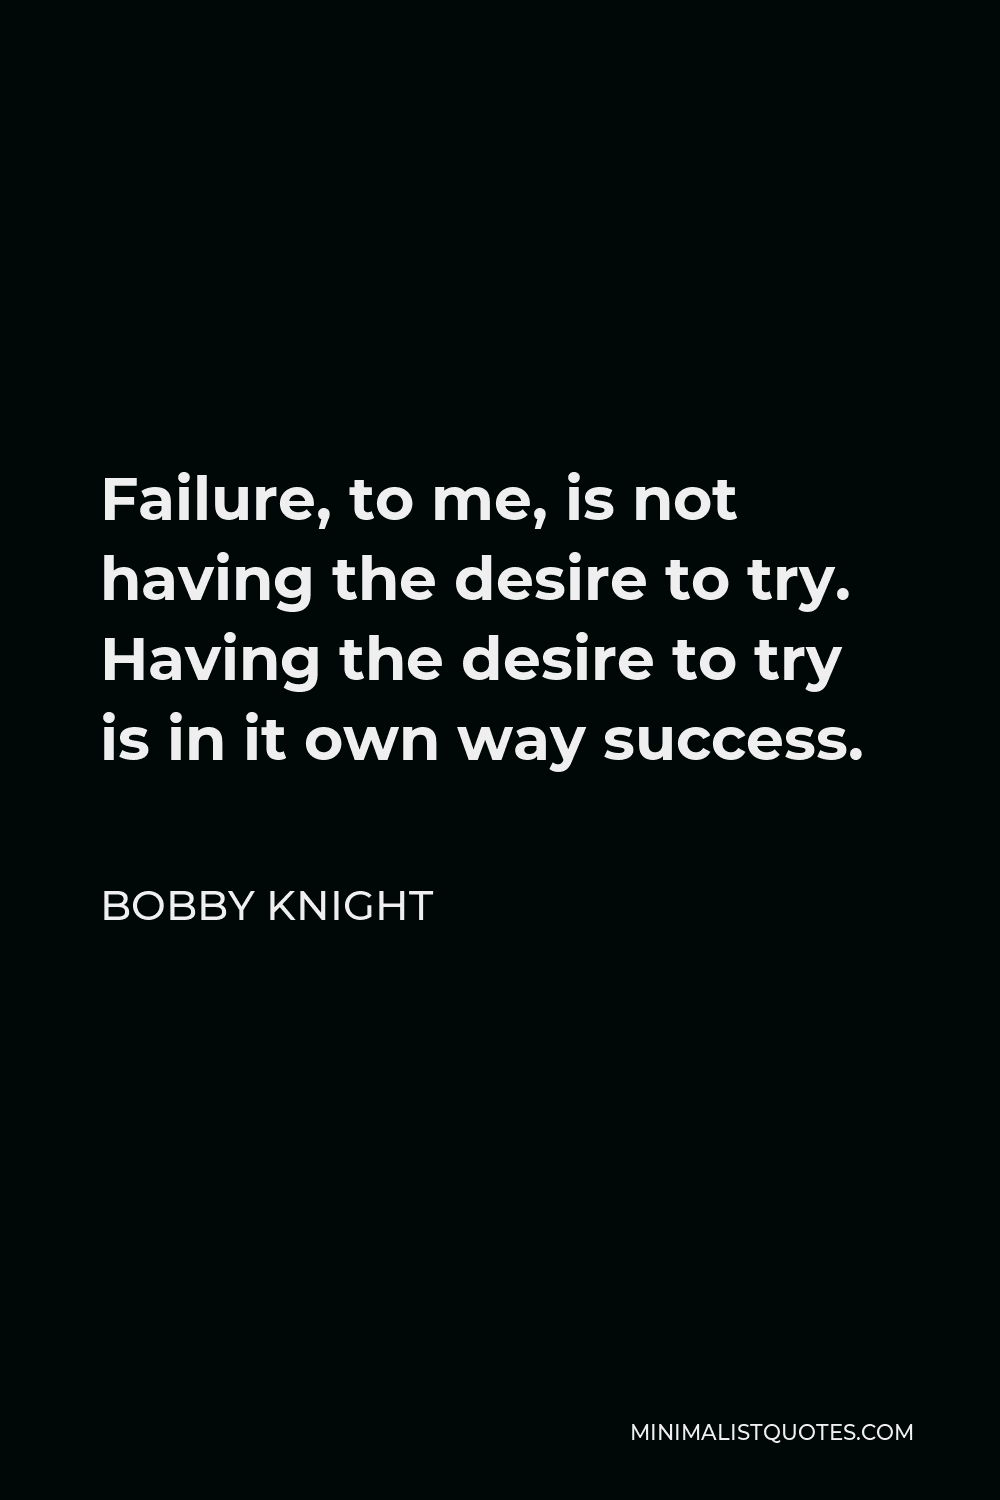 Bobby Knight Quote - Failure, to me, is not having the desire to try. Having the desire to try is in it own way success.